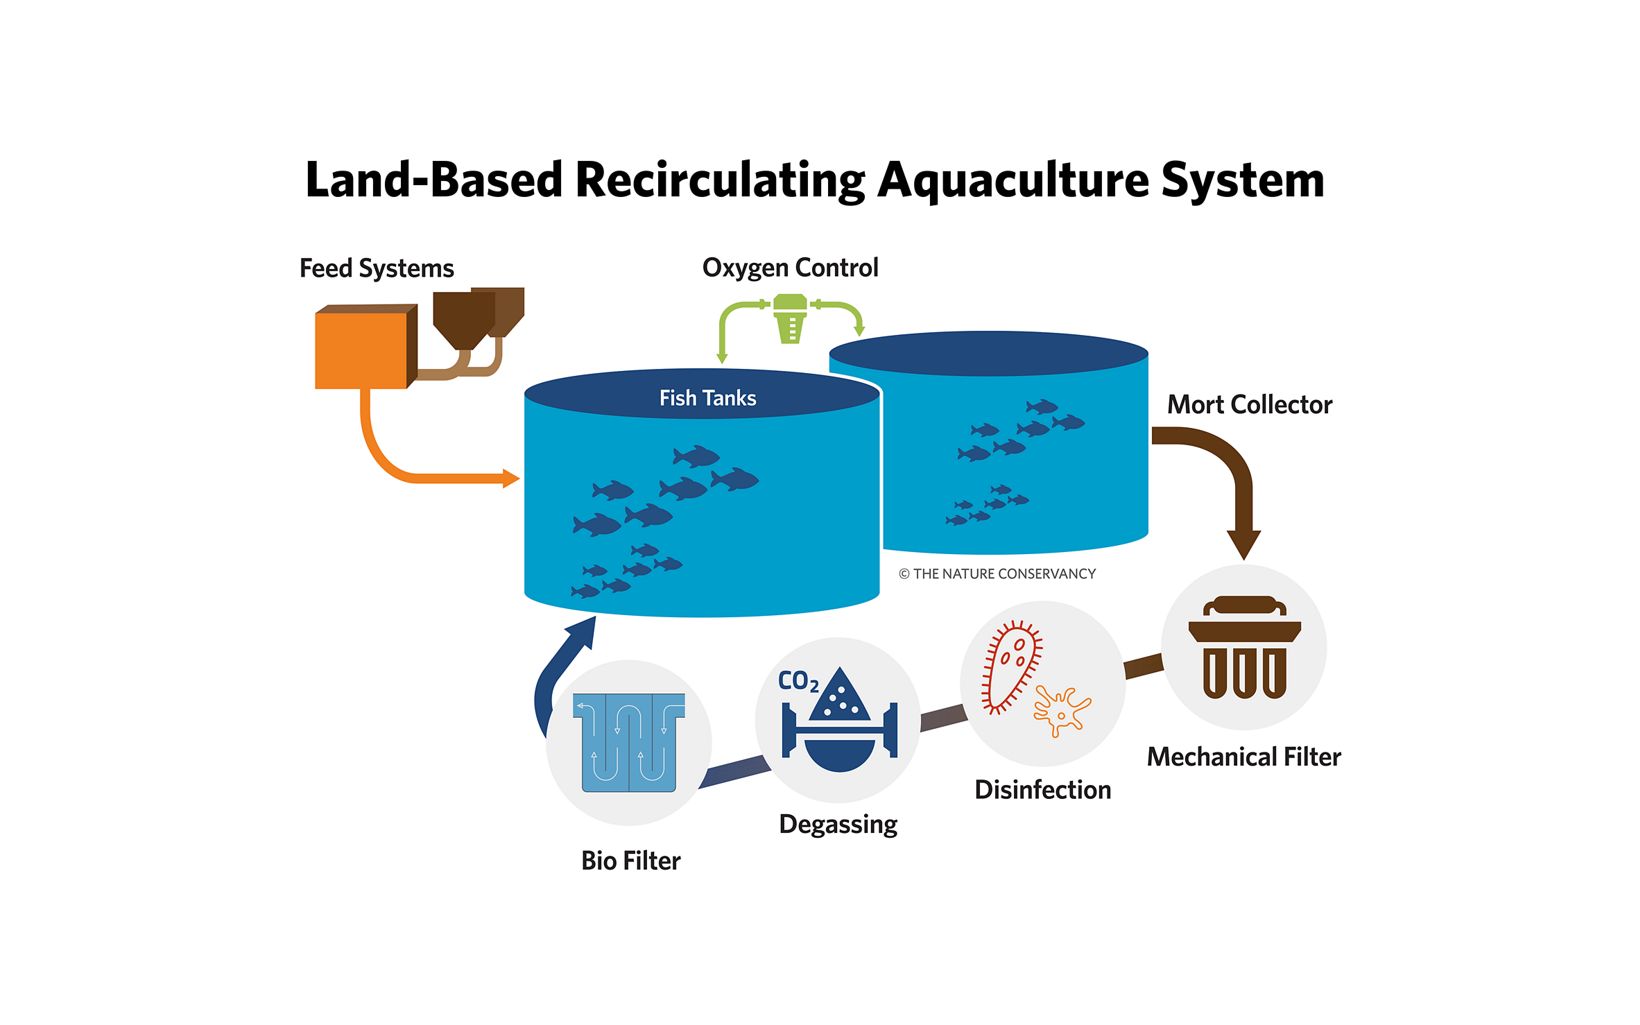 Land-based RAS may offer an alternative to traditional, near-shore finfish production that may enable improved environmental outcomes, higher production density, reduced mortality, and greater control over production outcomes.